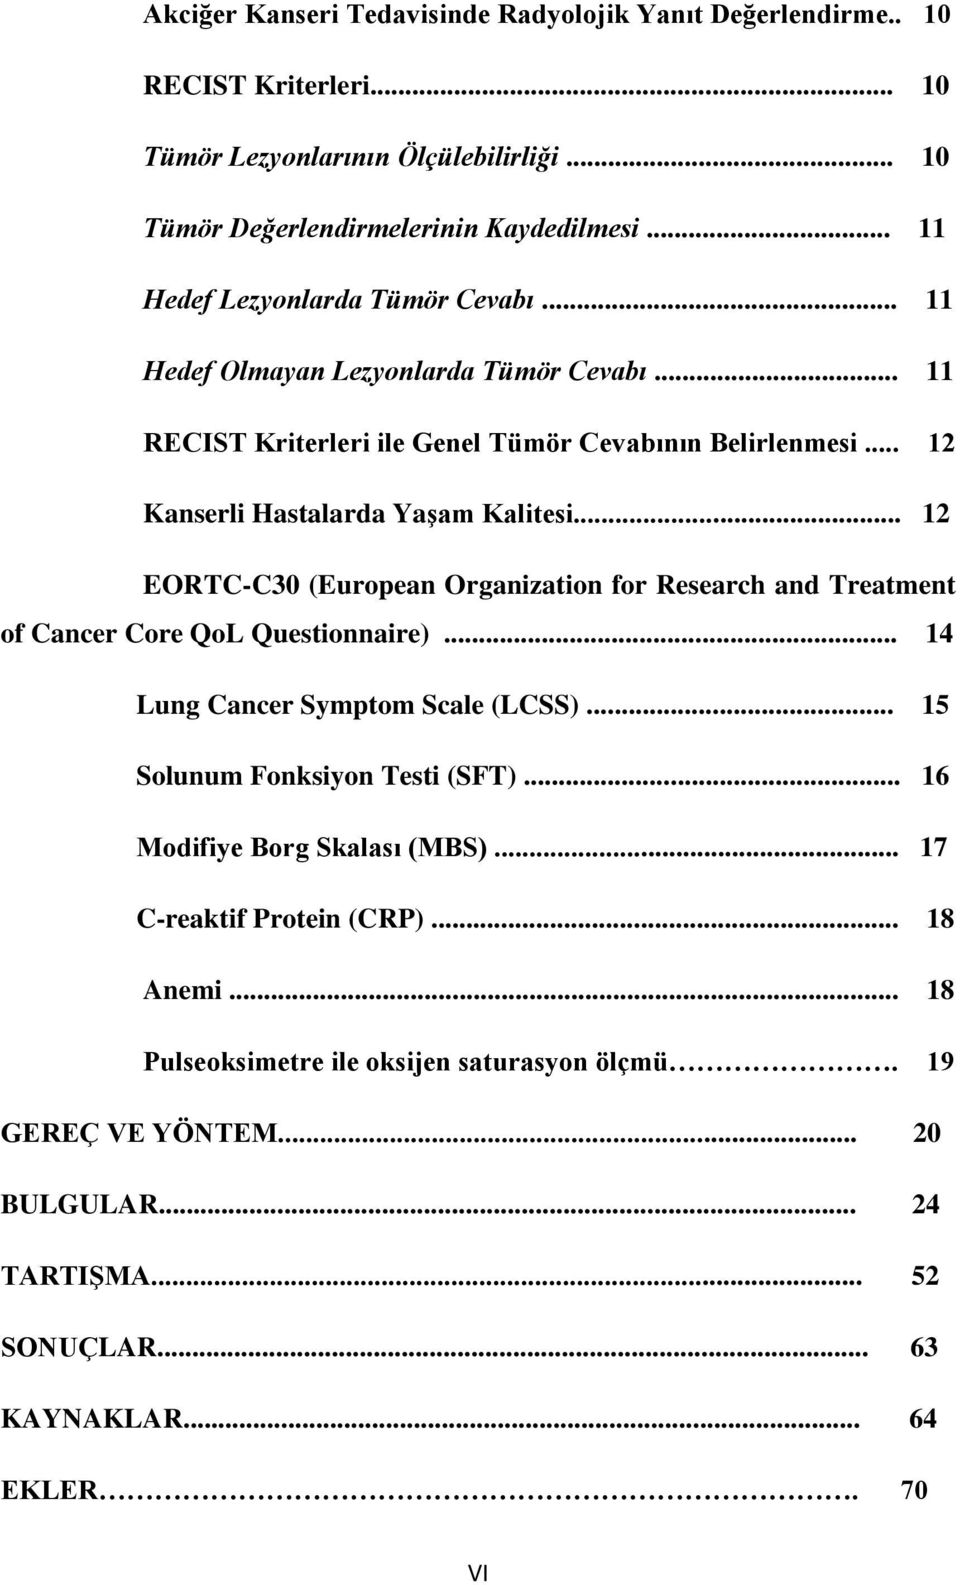 .. 12 EORTC-C30 (European Organization for Research and Treatment of Cancer Core QoL Questionnaire)... 14 Lung Cancer Symptom Scale (LCSS)... 15 Solunum Fonksiyon Testi (SFT).